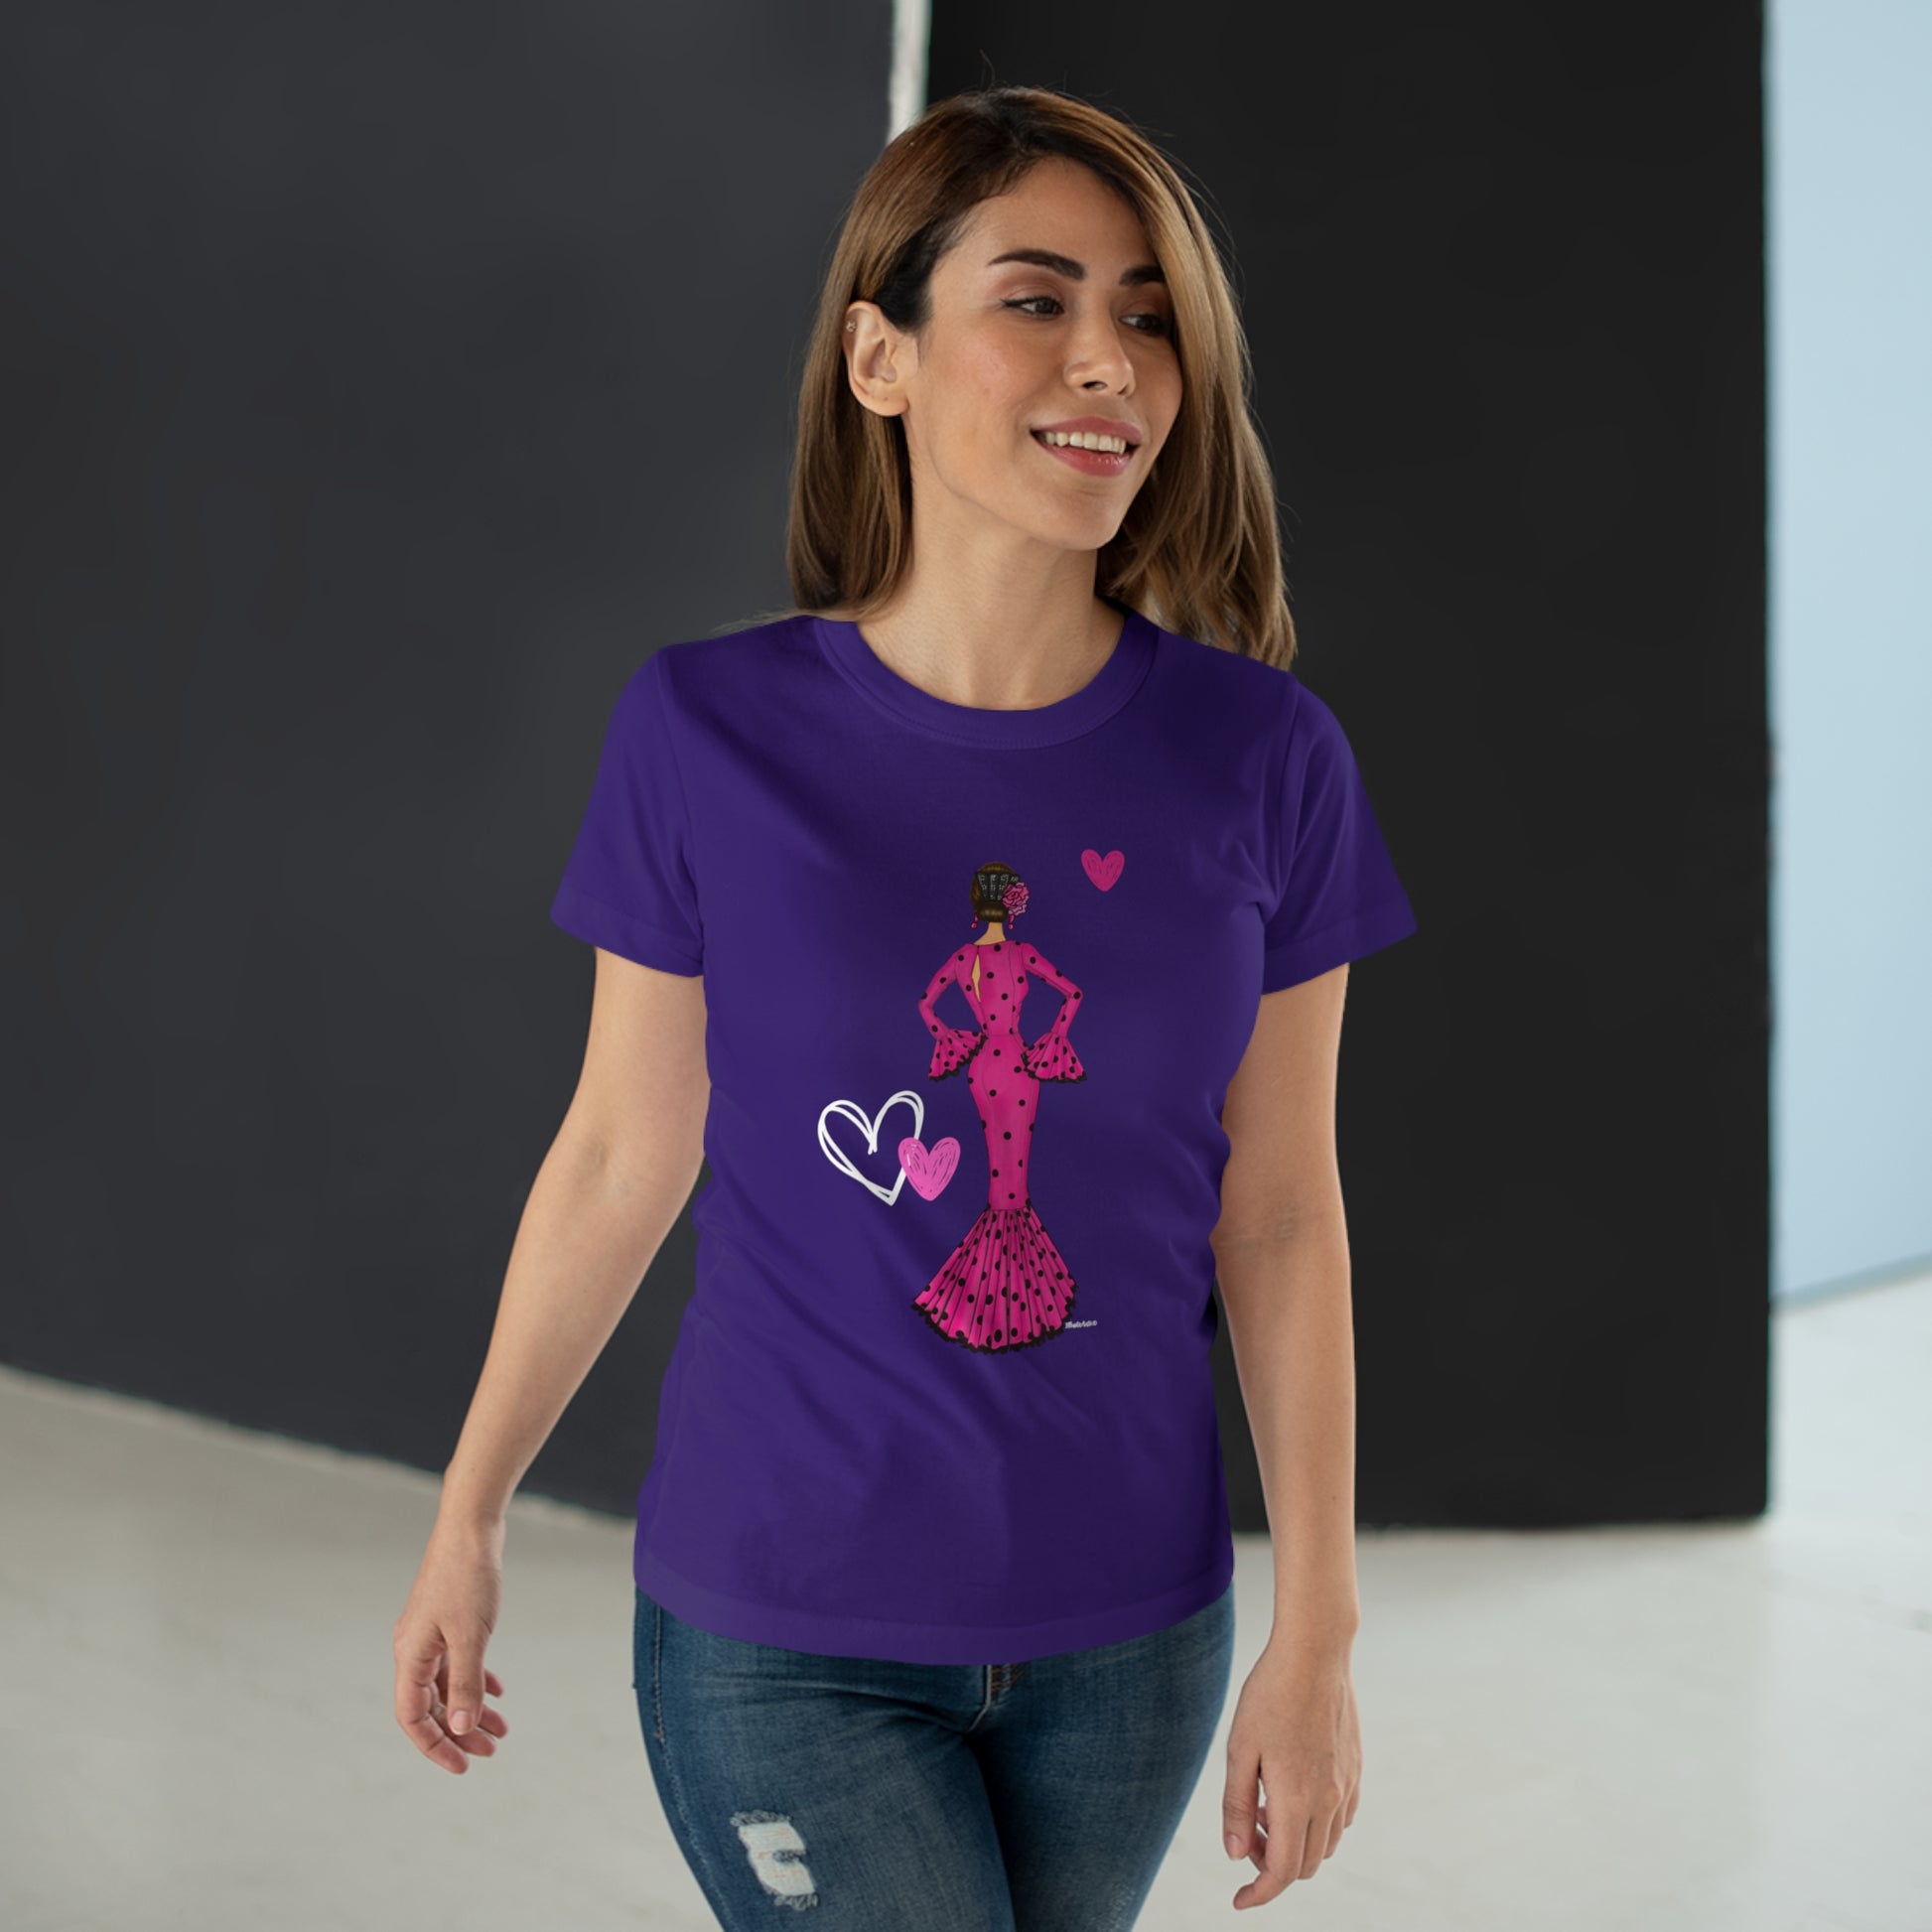 a woman wearing a purple t - shirt with a silhouette of a woman holding a